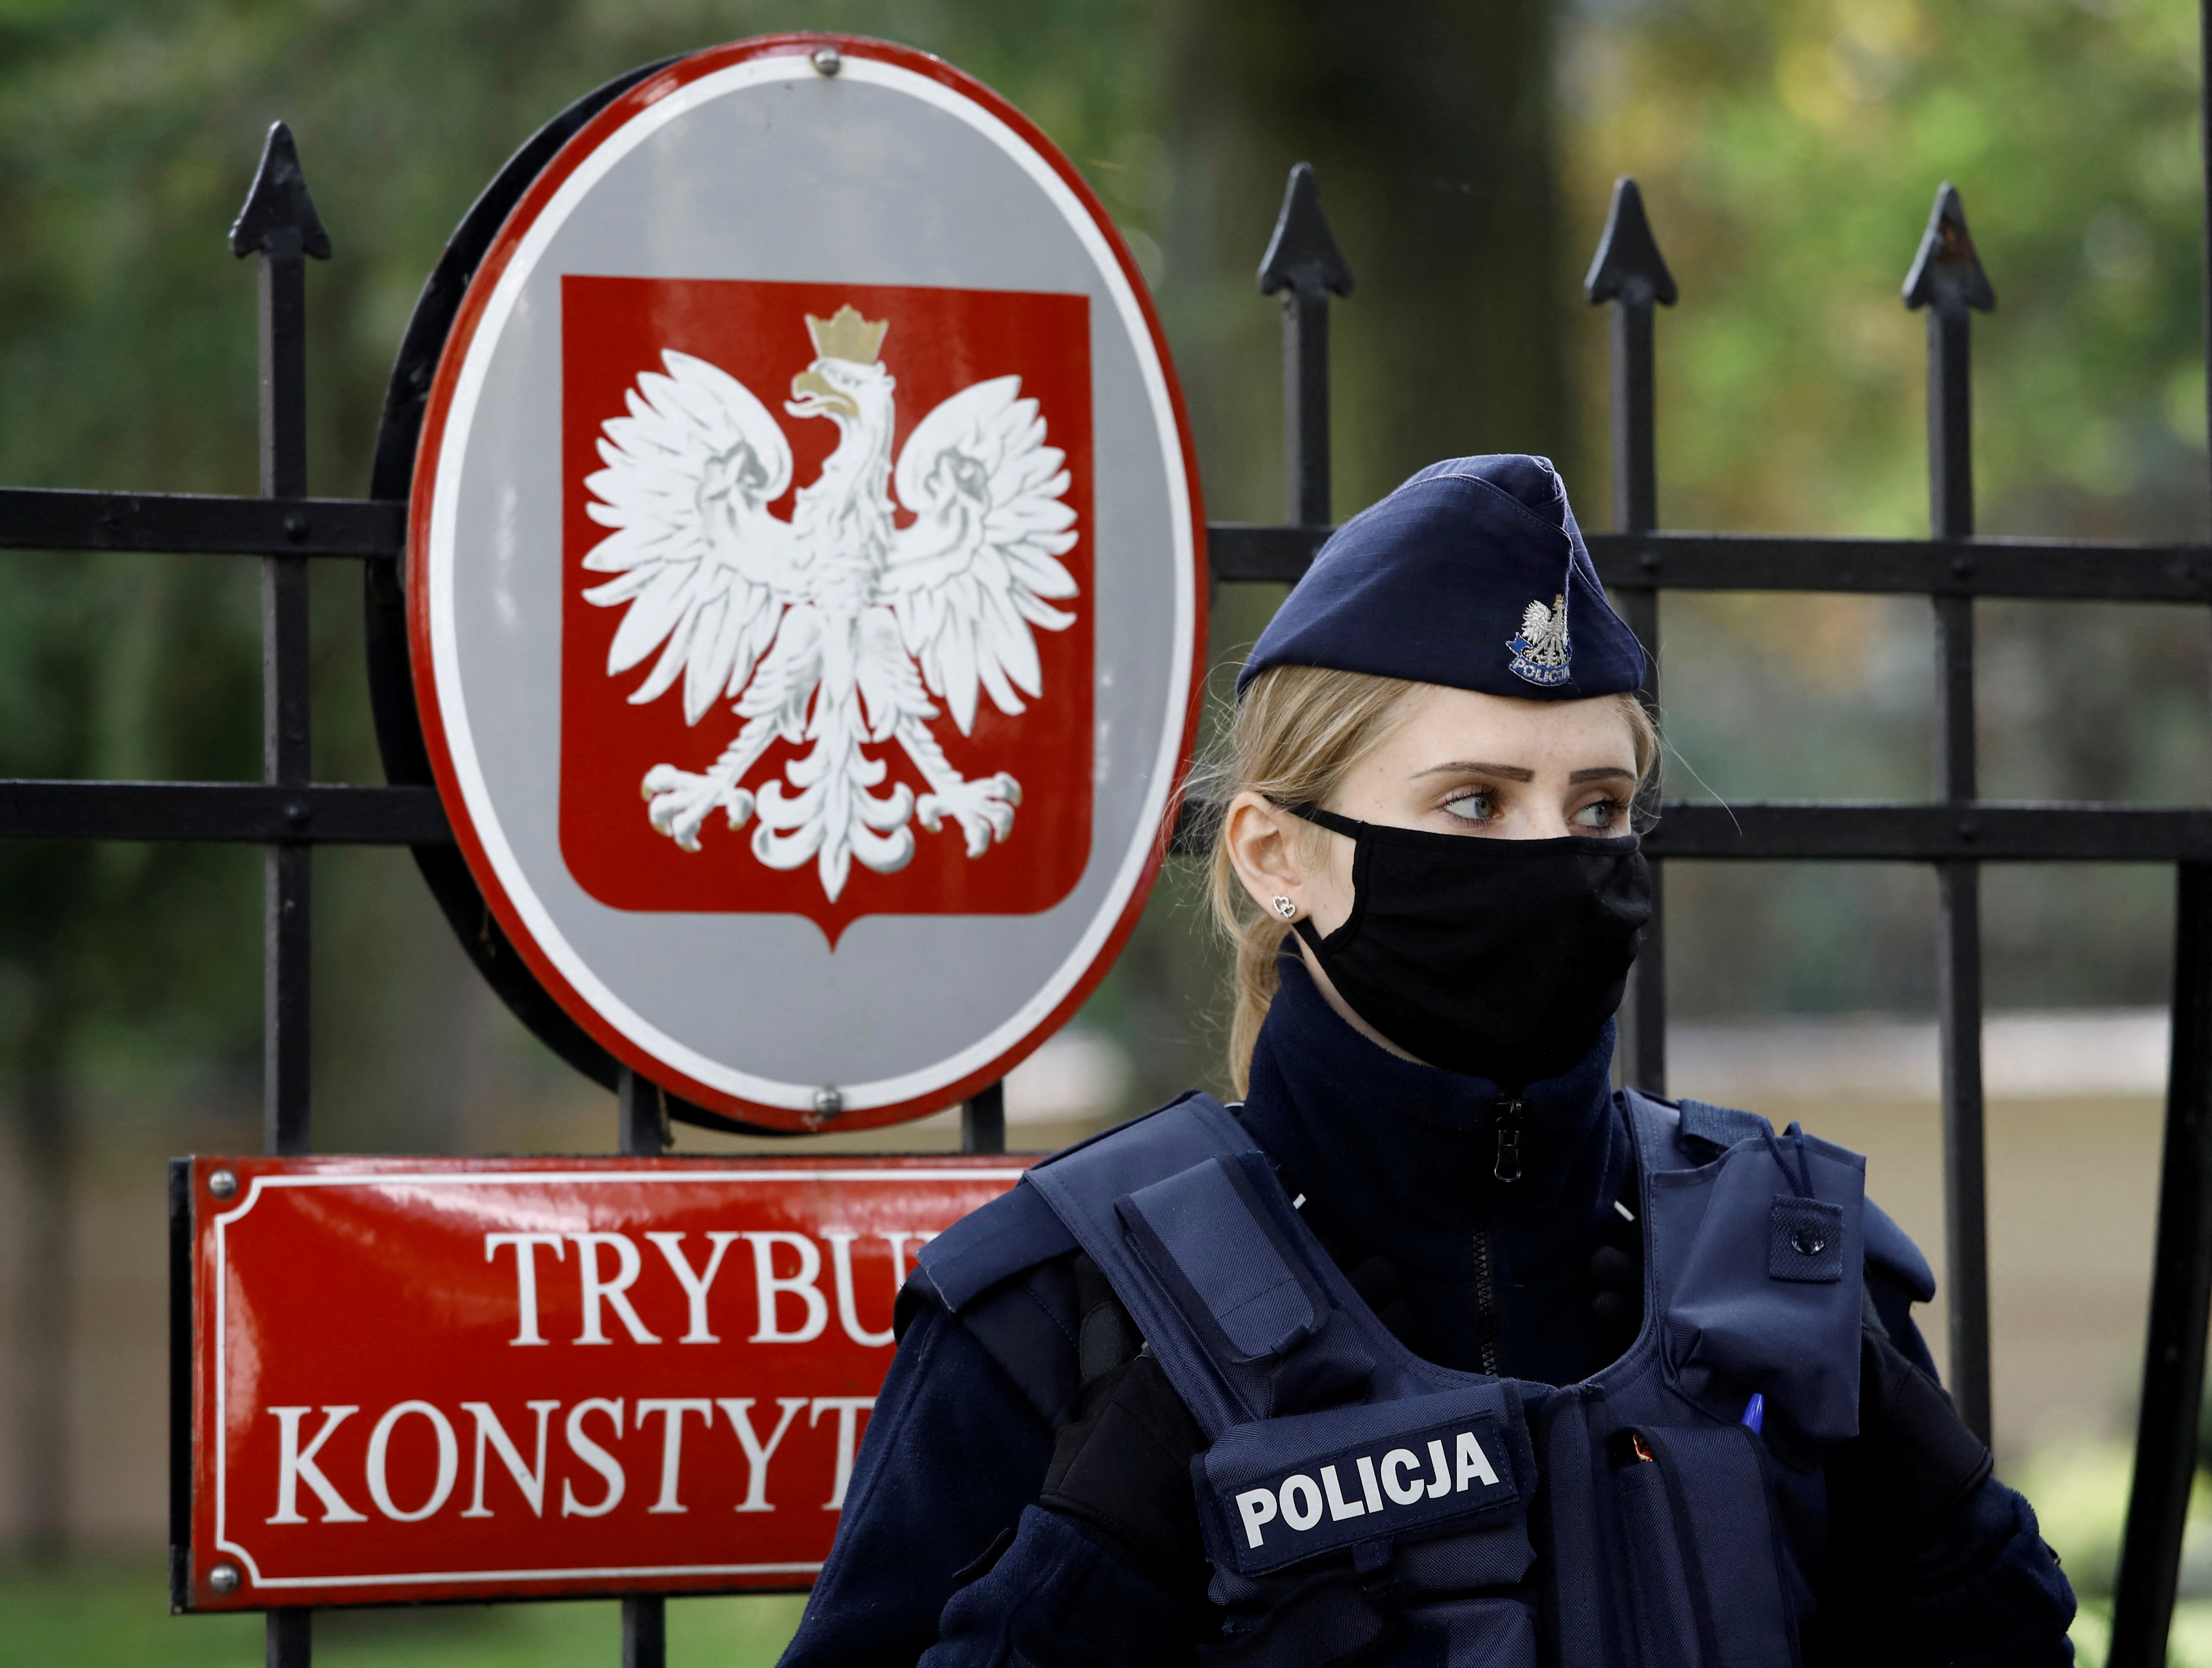 Police officer stands outside Constitutional Tribunal building in Warsaw